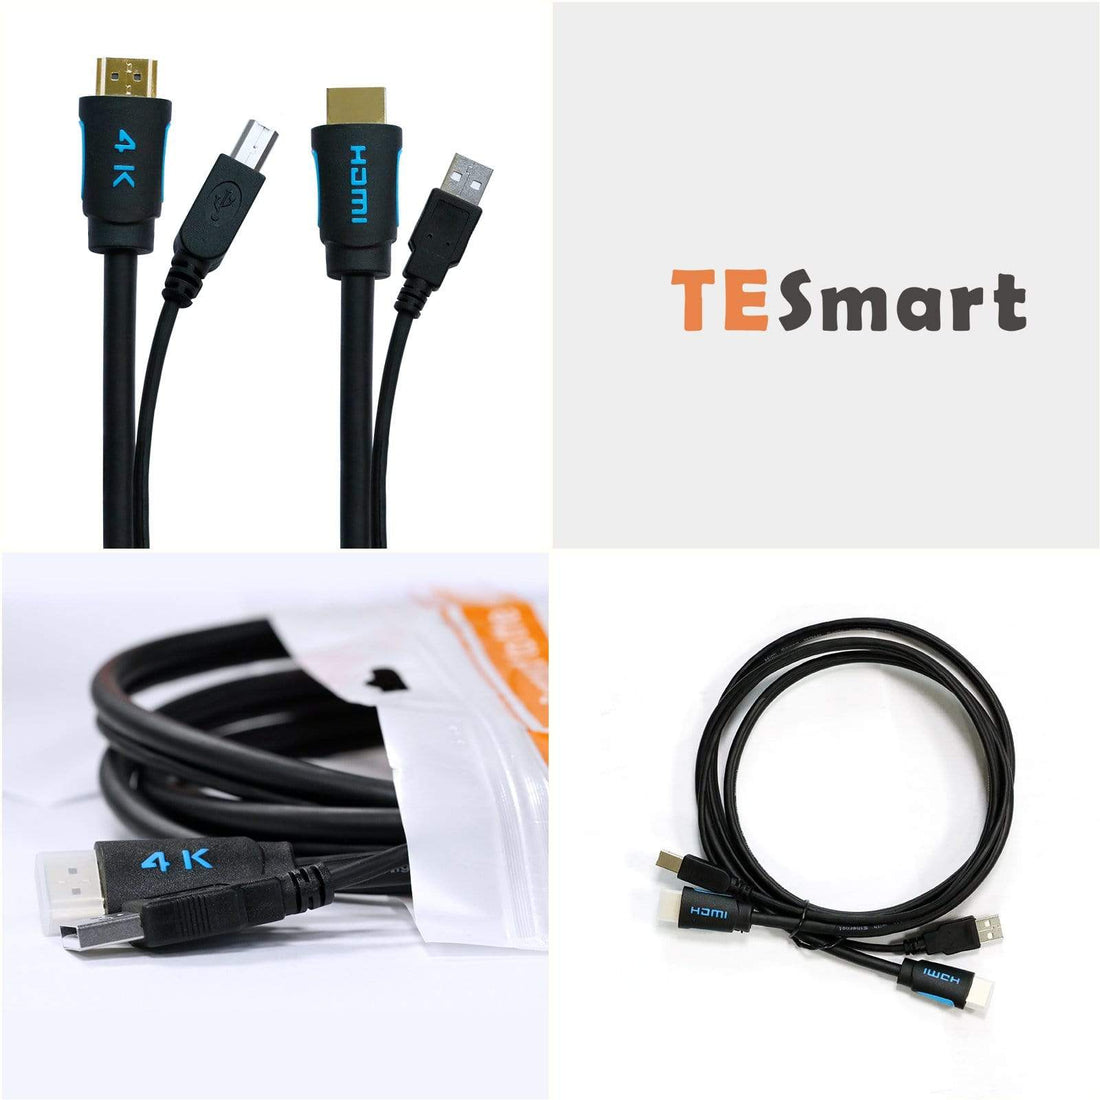 TESmart 2 Pcs 5ft Standard Twin Cable HDMI + USB KVM Cable USB Type A to USB Type B (2 Pcs/Lot USB + HDMI Cables) - image 2 of 6